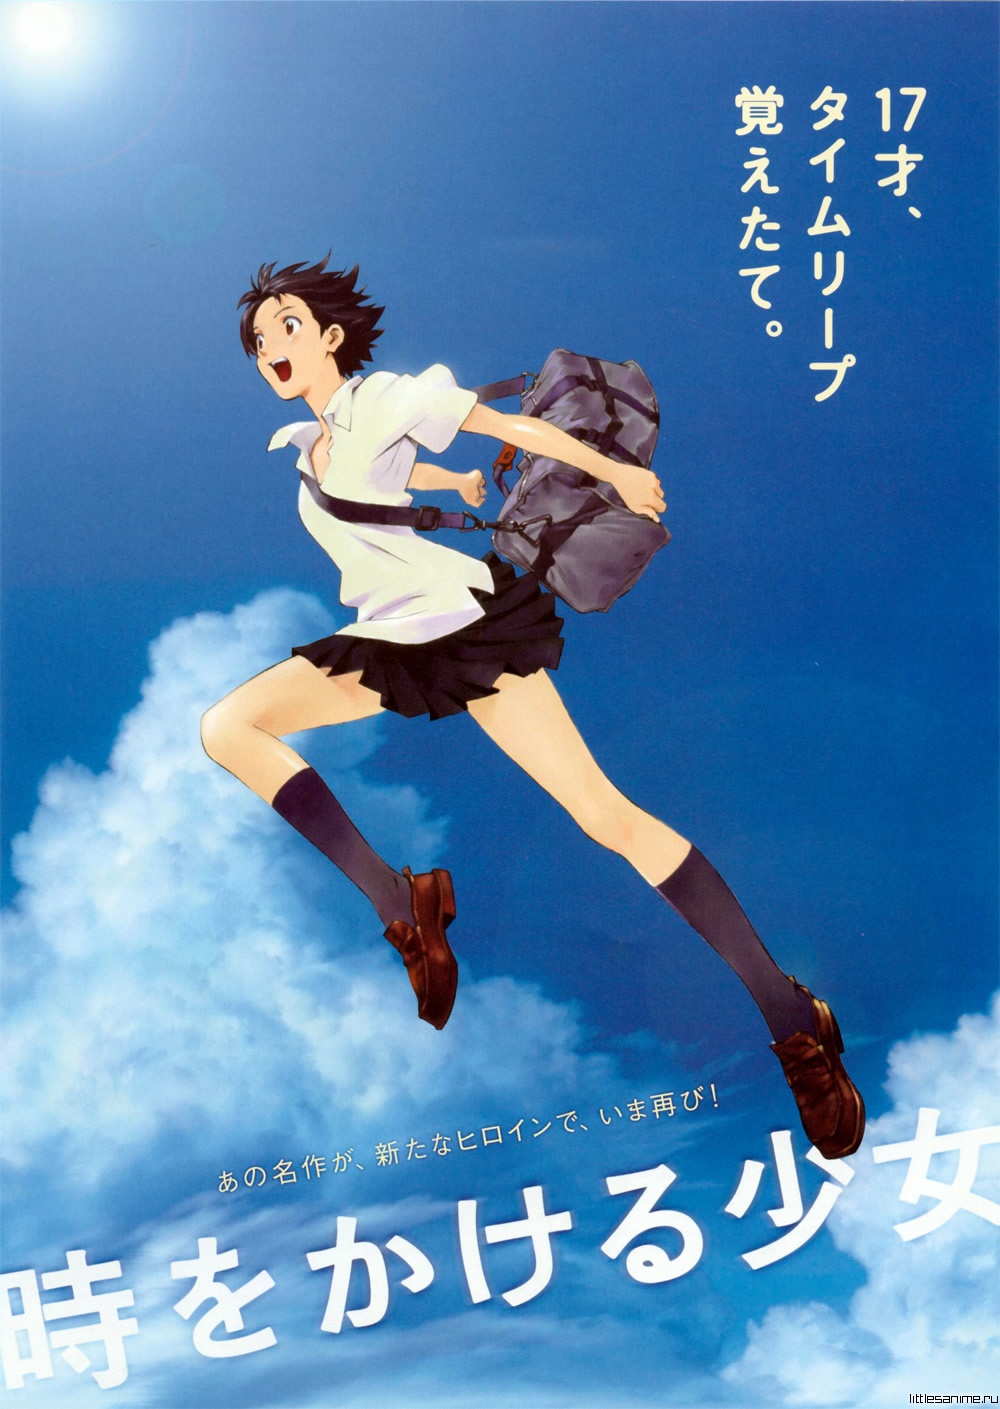 The Girl Who Leapt Through Time (2006)